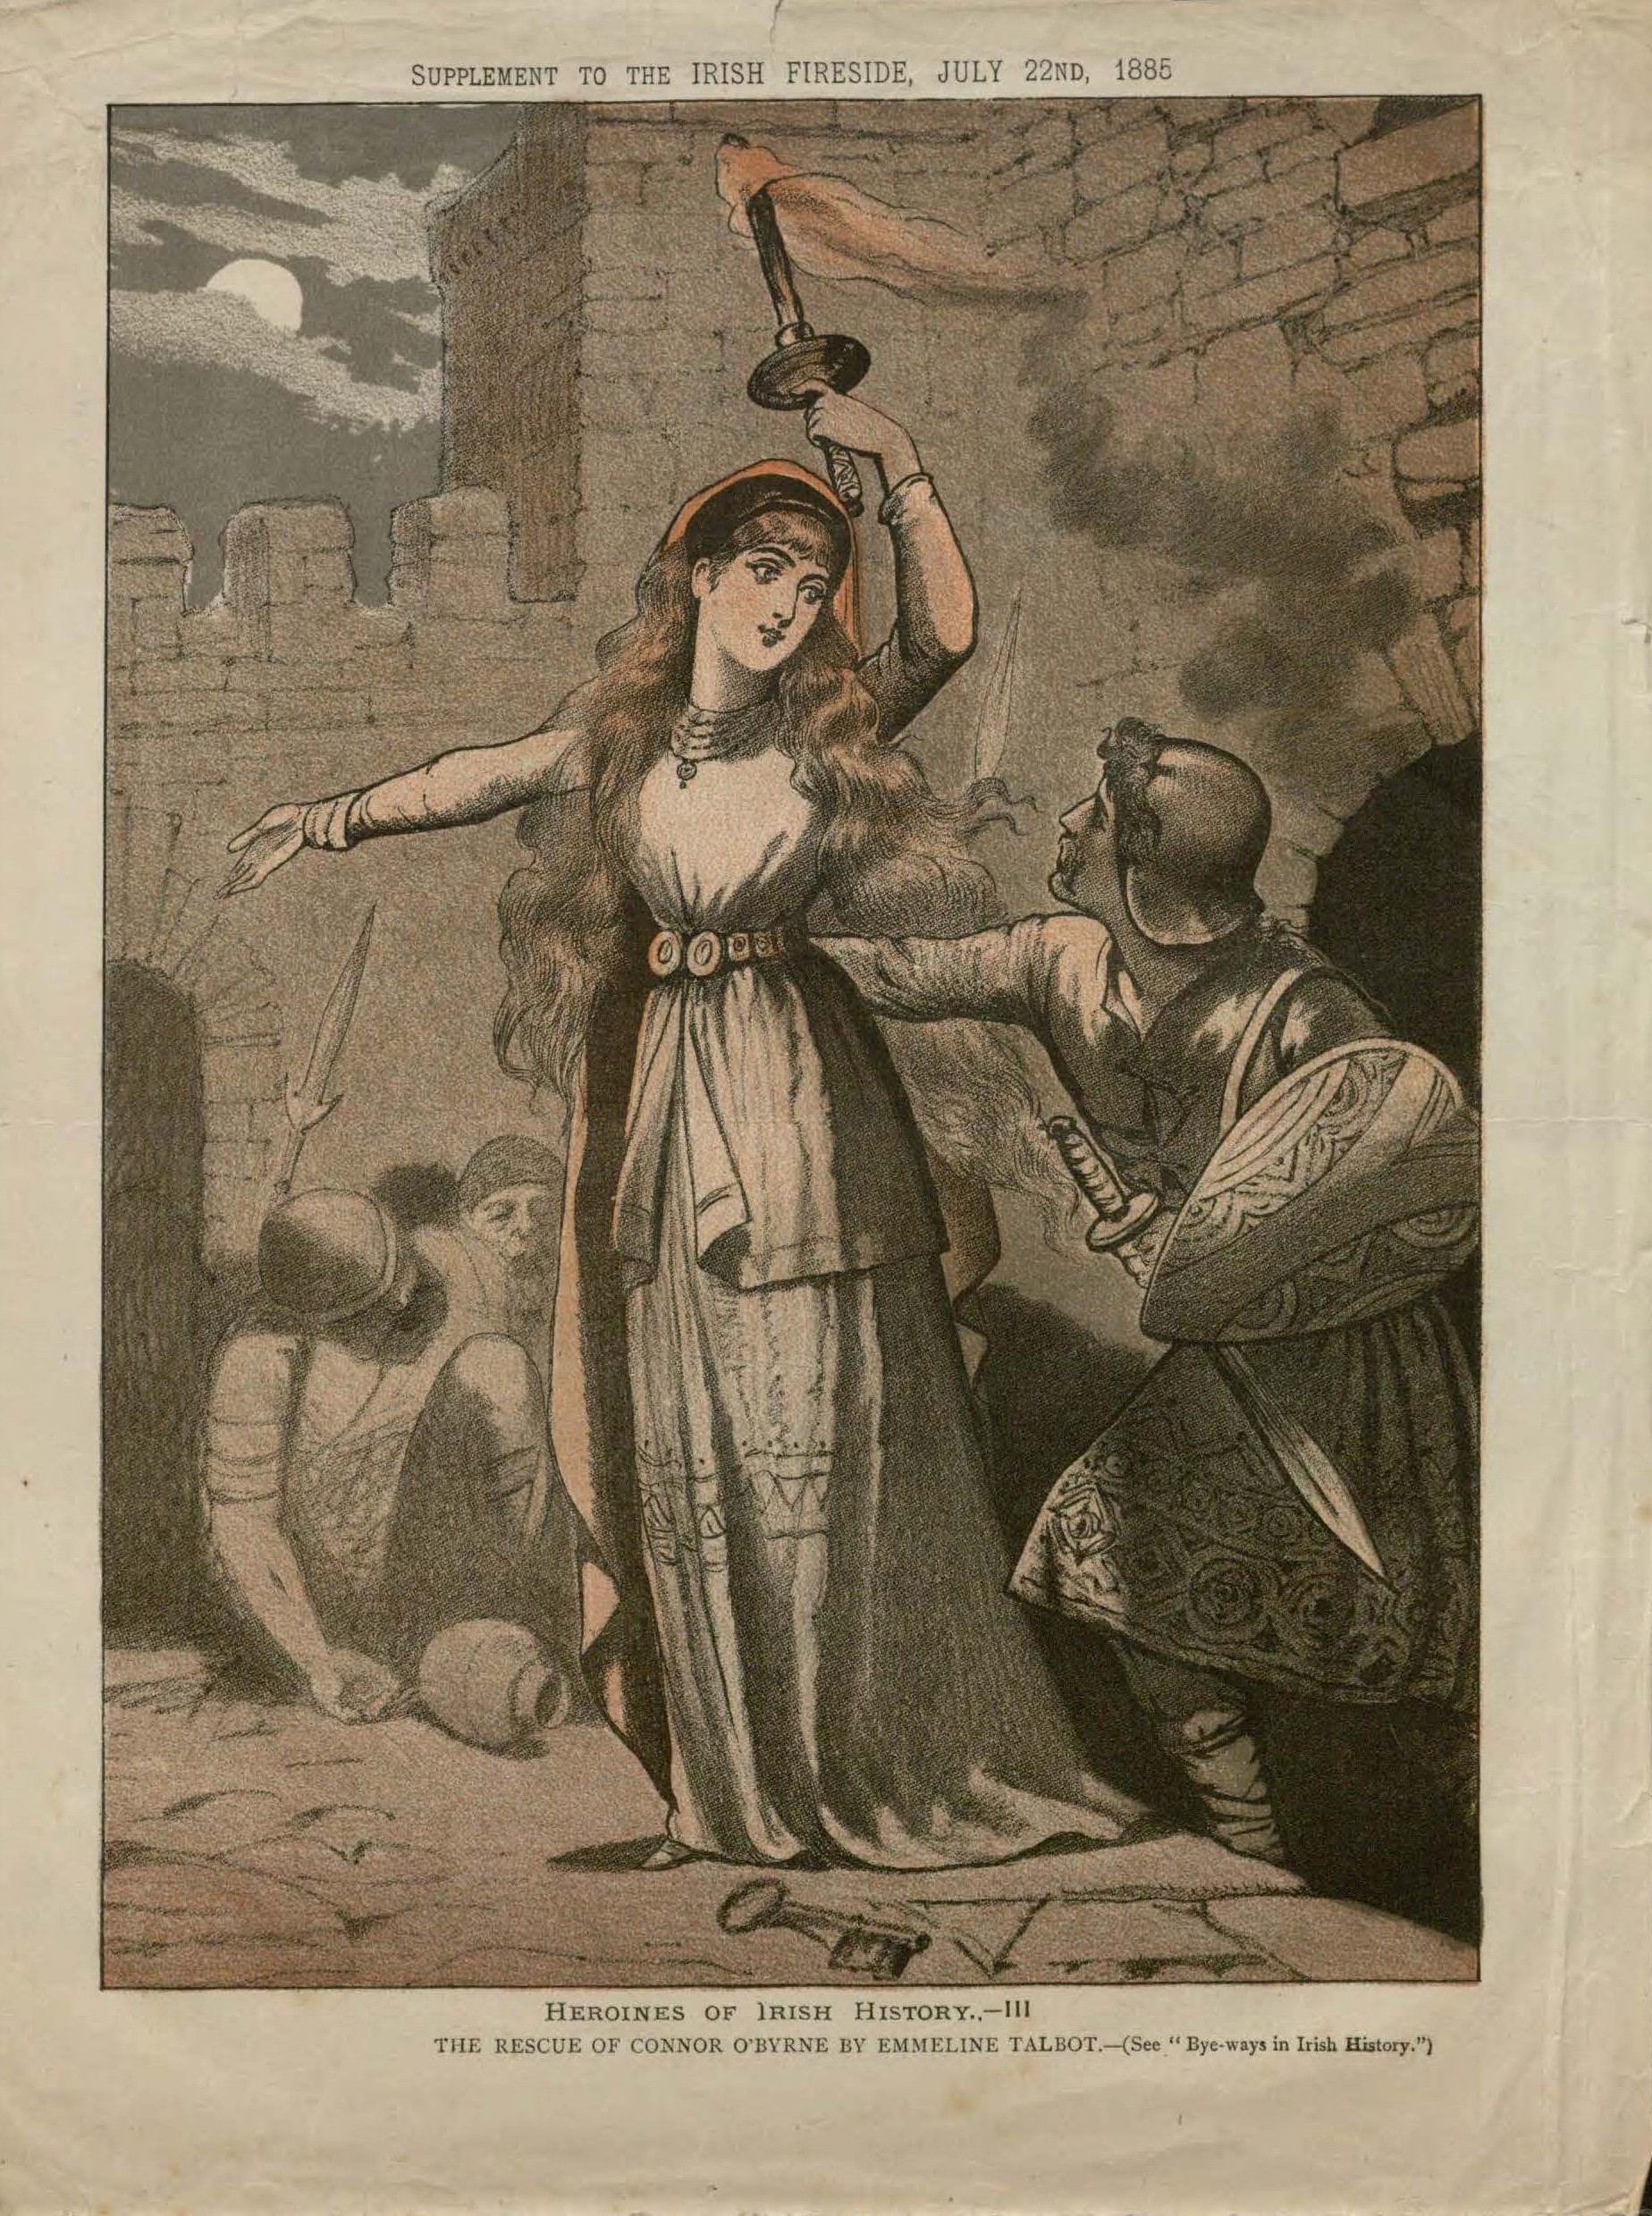 Image of Color Supplement from The Irish Fireside, Heroines of Irish History: Emmeline Talbot, July 22, 1885